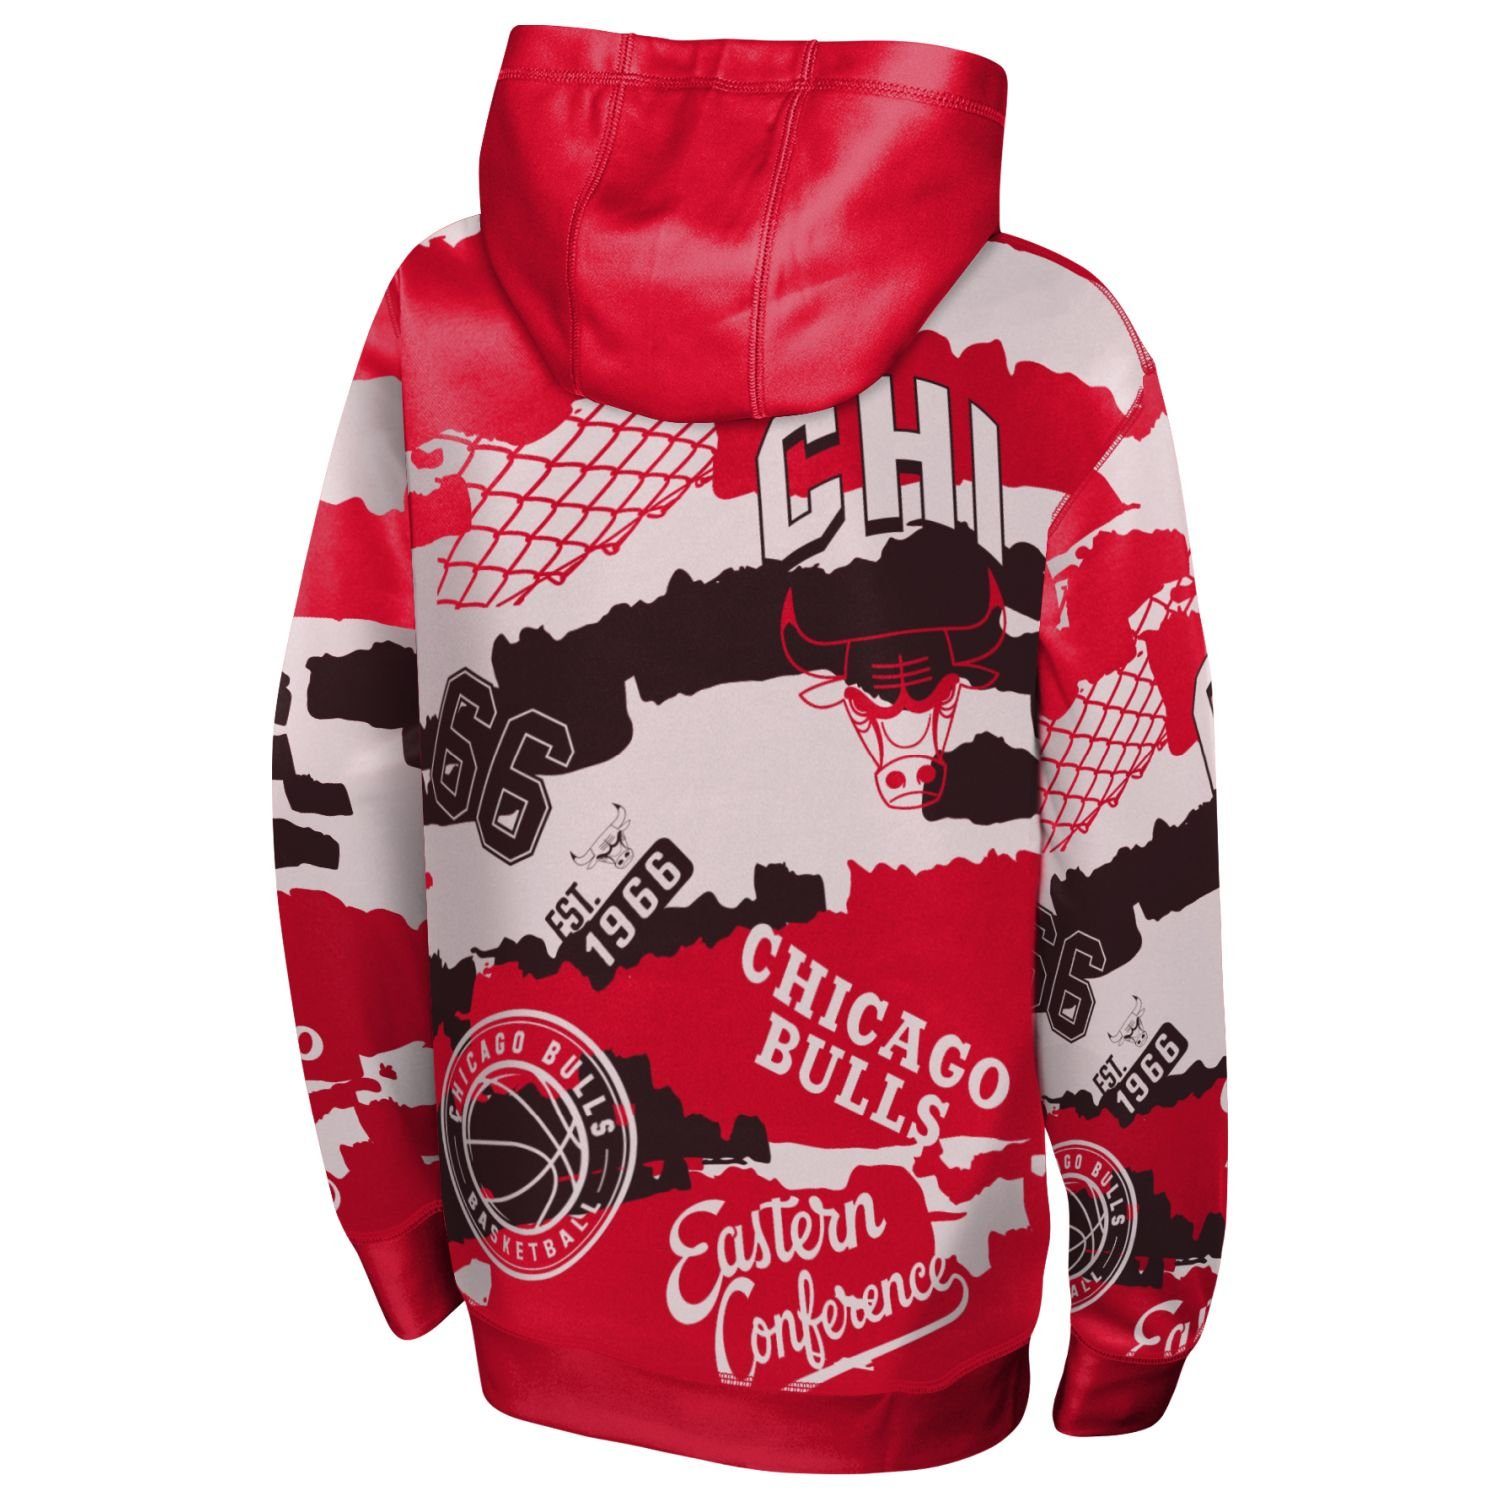 Outerstuff Kapuzenpullover NBA THE Sublimated LIMIT Chicago Bulls